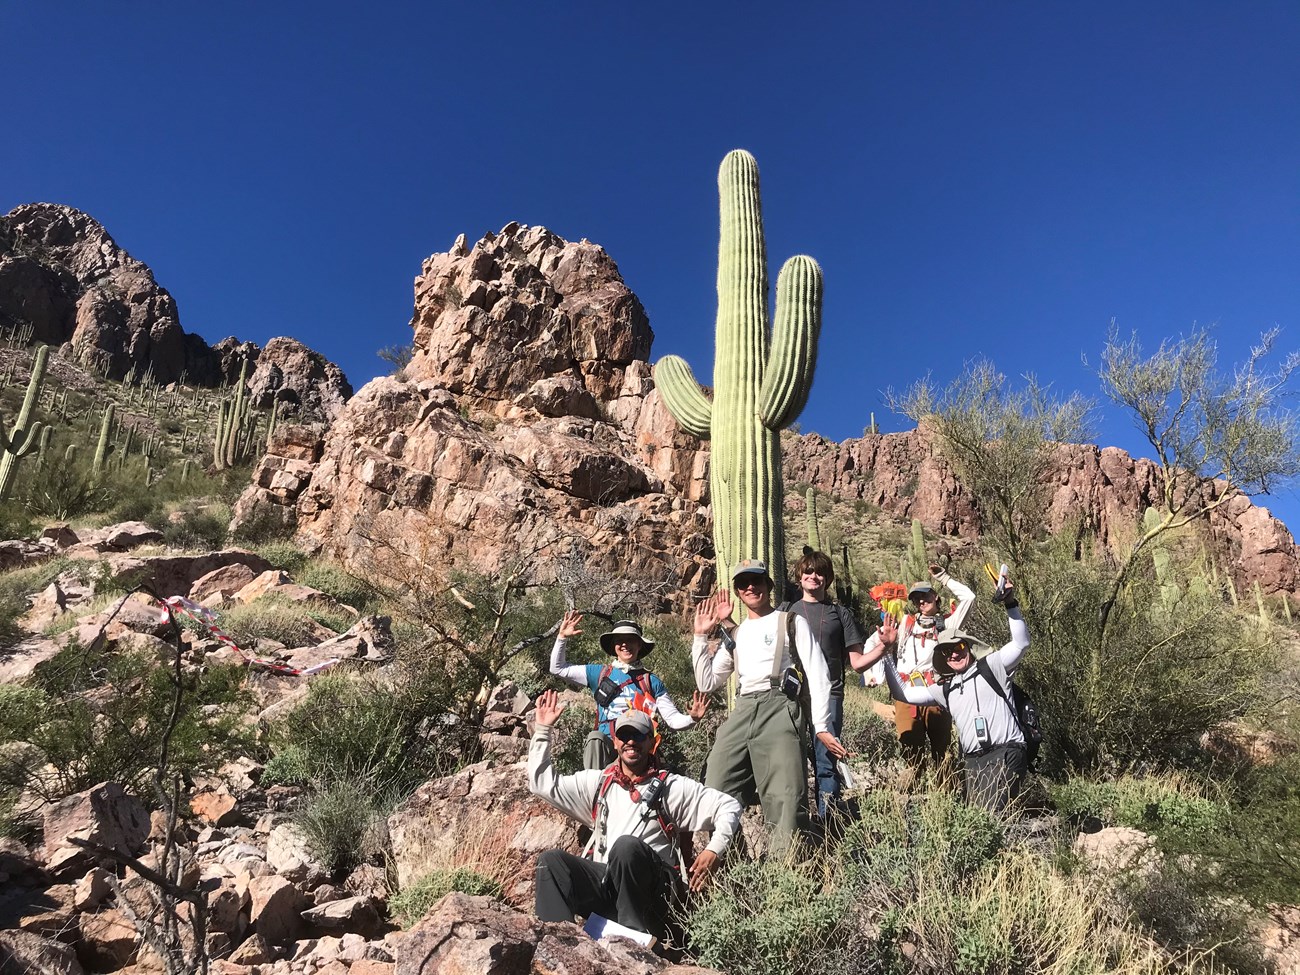 A group photo where everyone is posing like a saguaro. Behind them is a tall saguaro and a nice mountainous view.